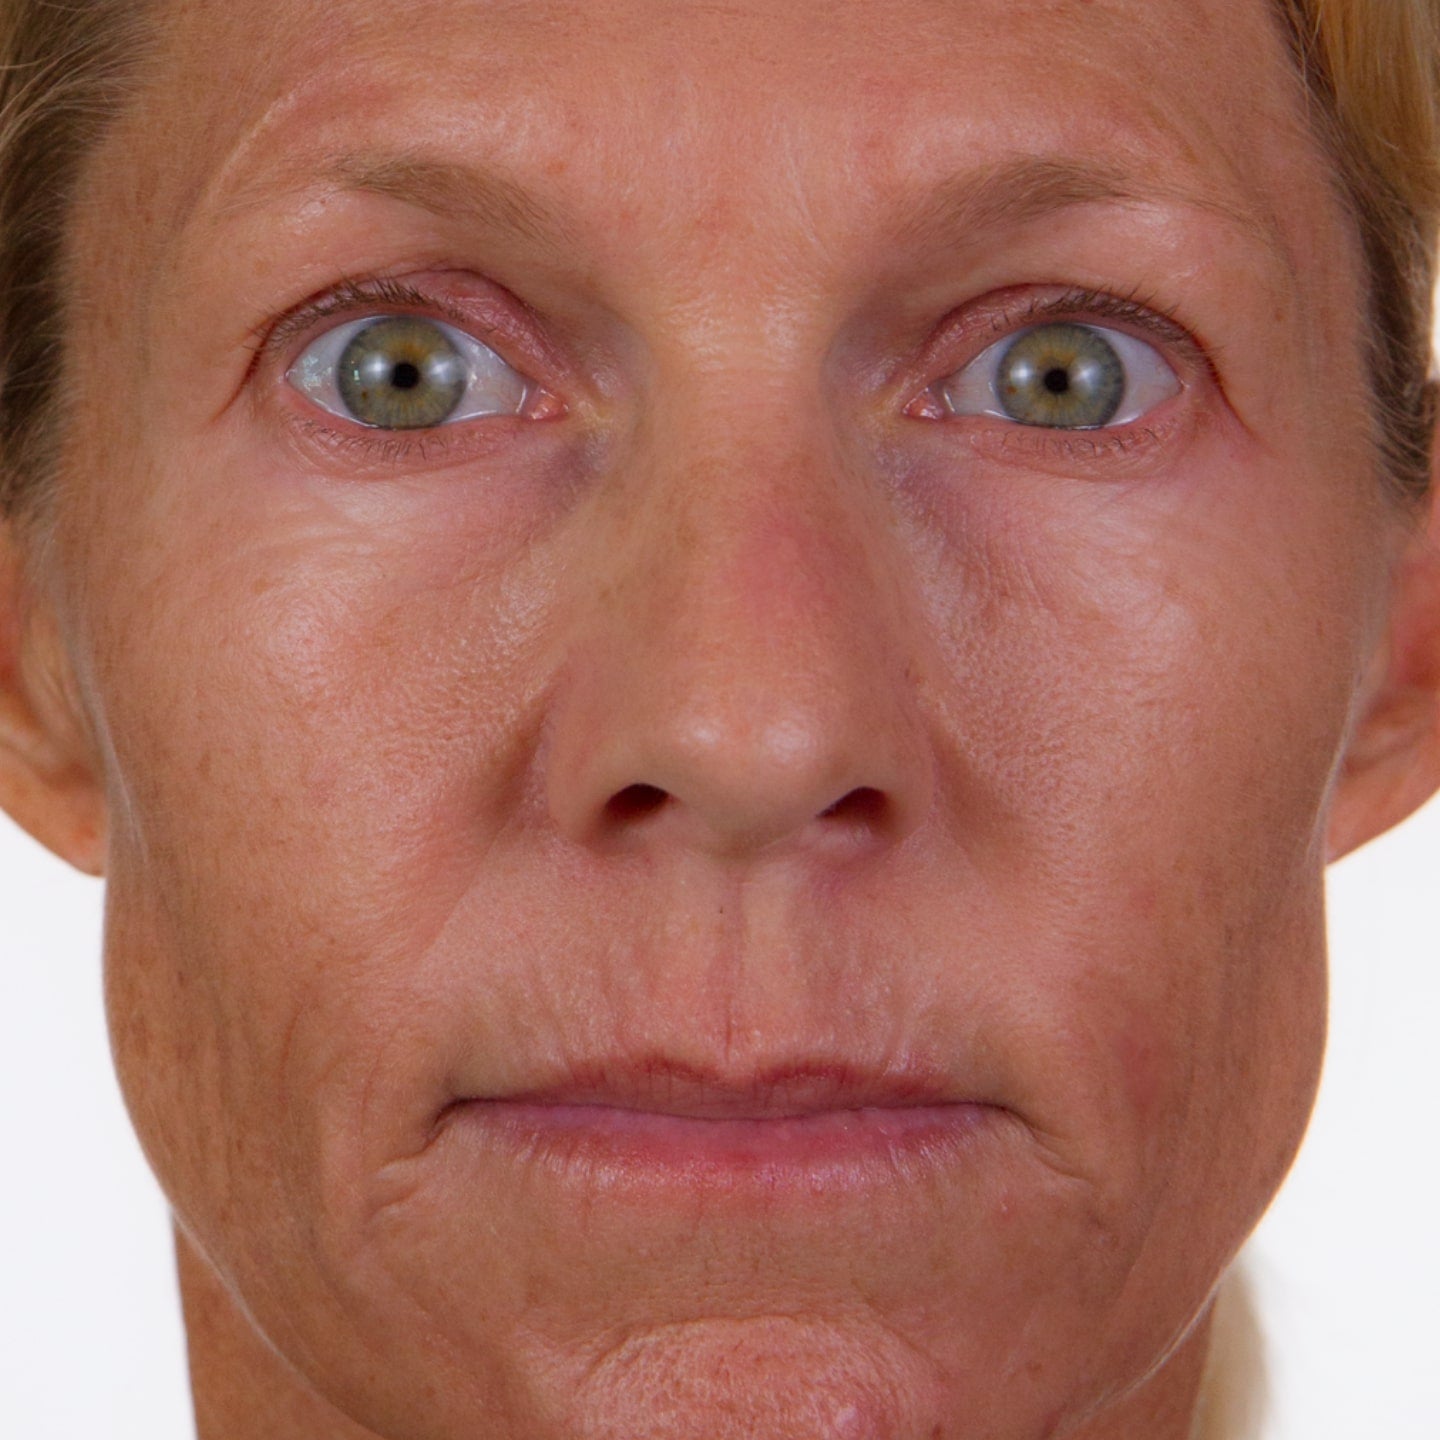 Close up photo of a woman's face with a blank expression